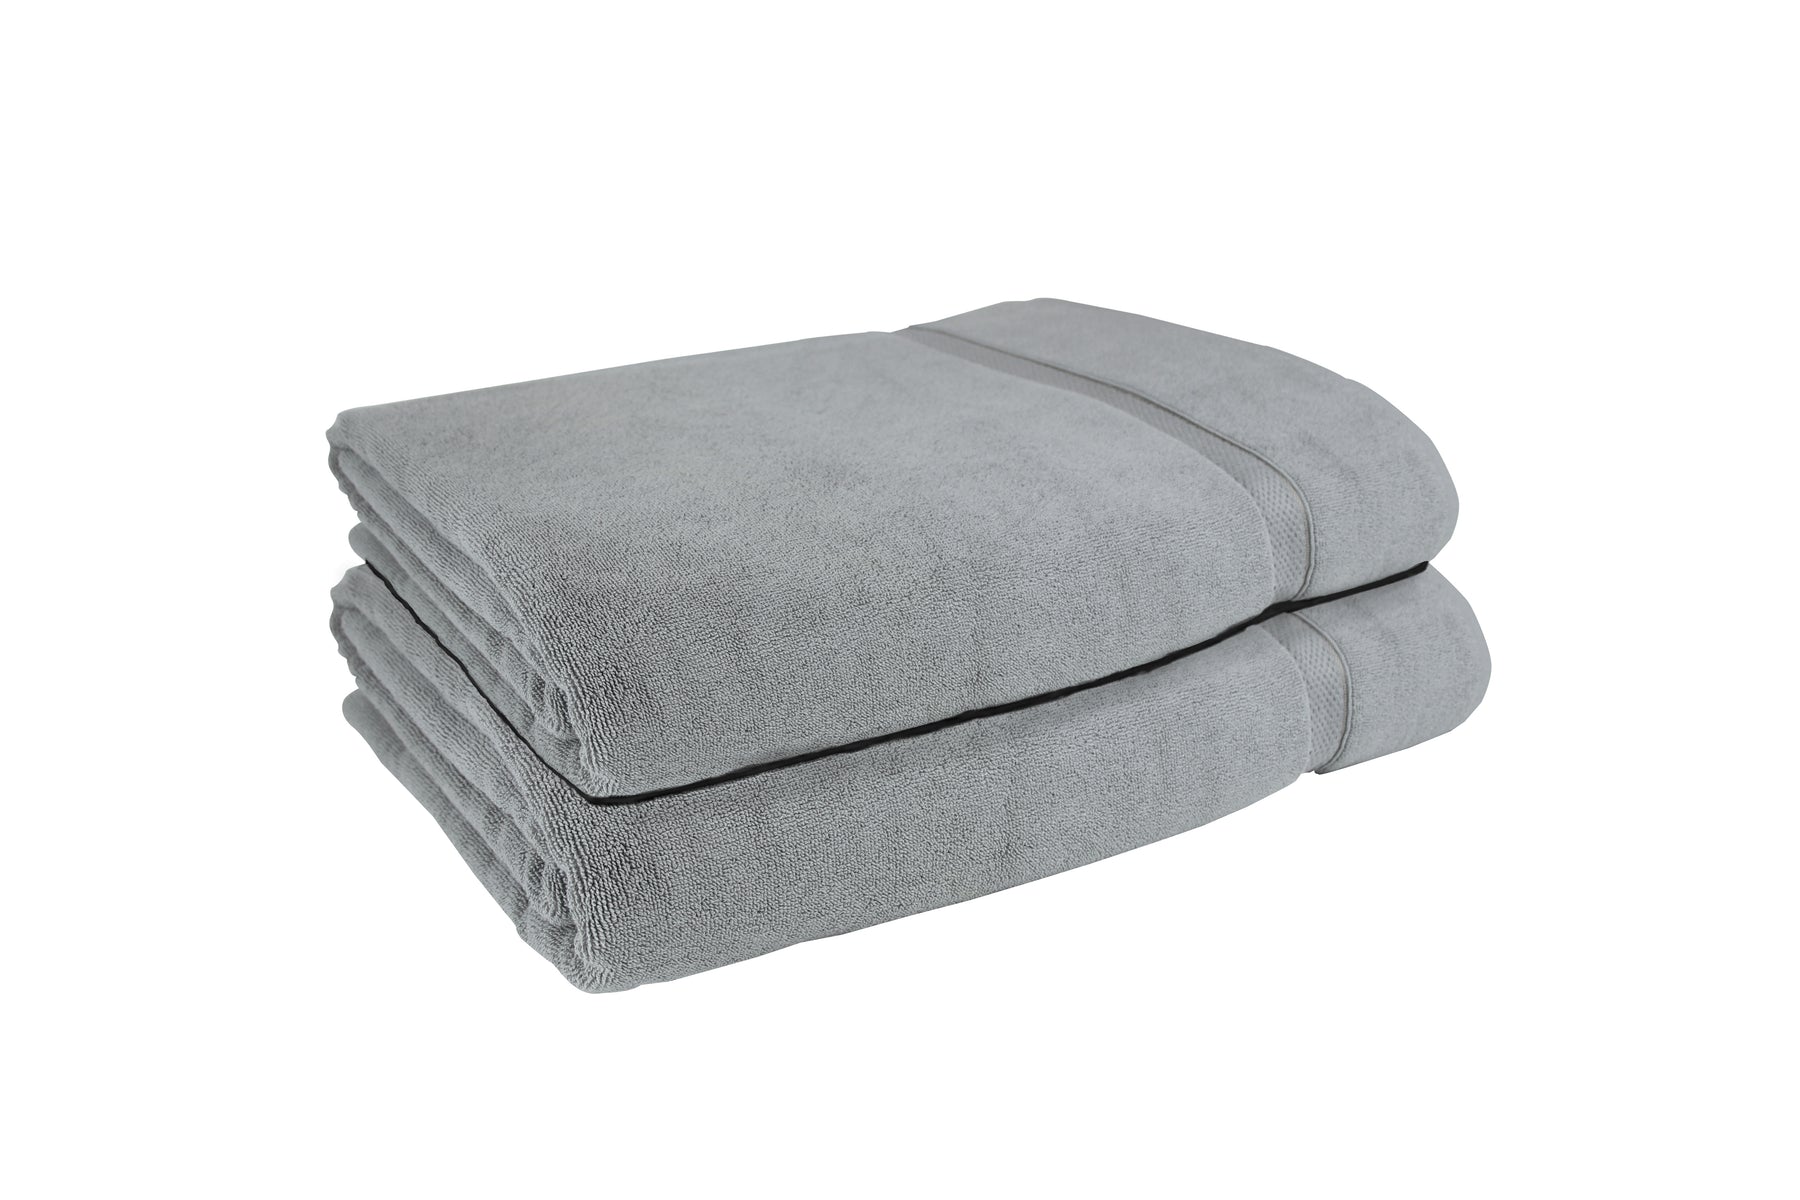 Wholesale Silver Grey Double Yarn Hand Towels 650gsm 100% Cotton - Packs of 4, 20 and 48